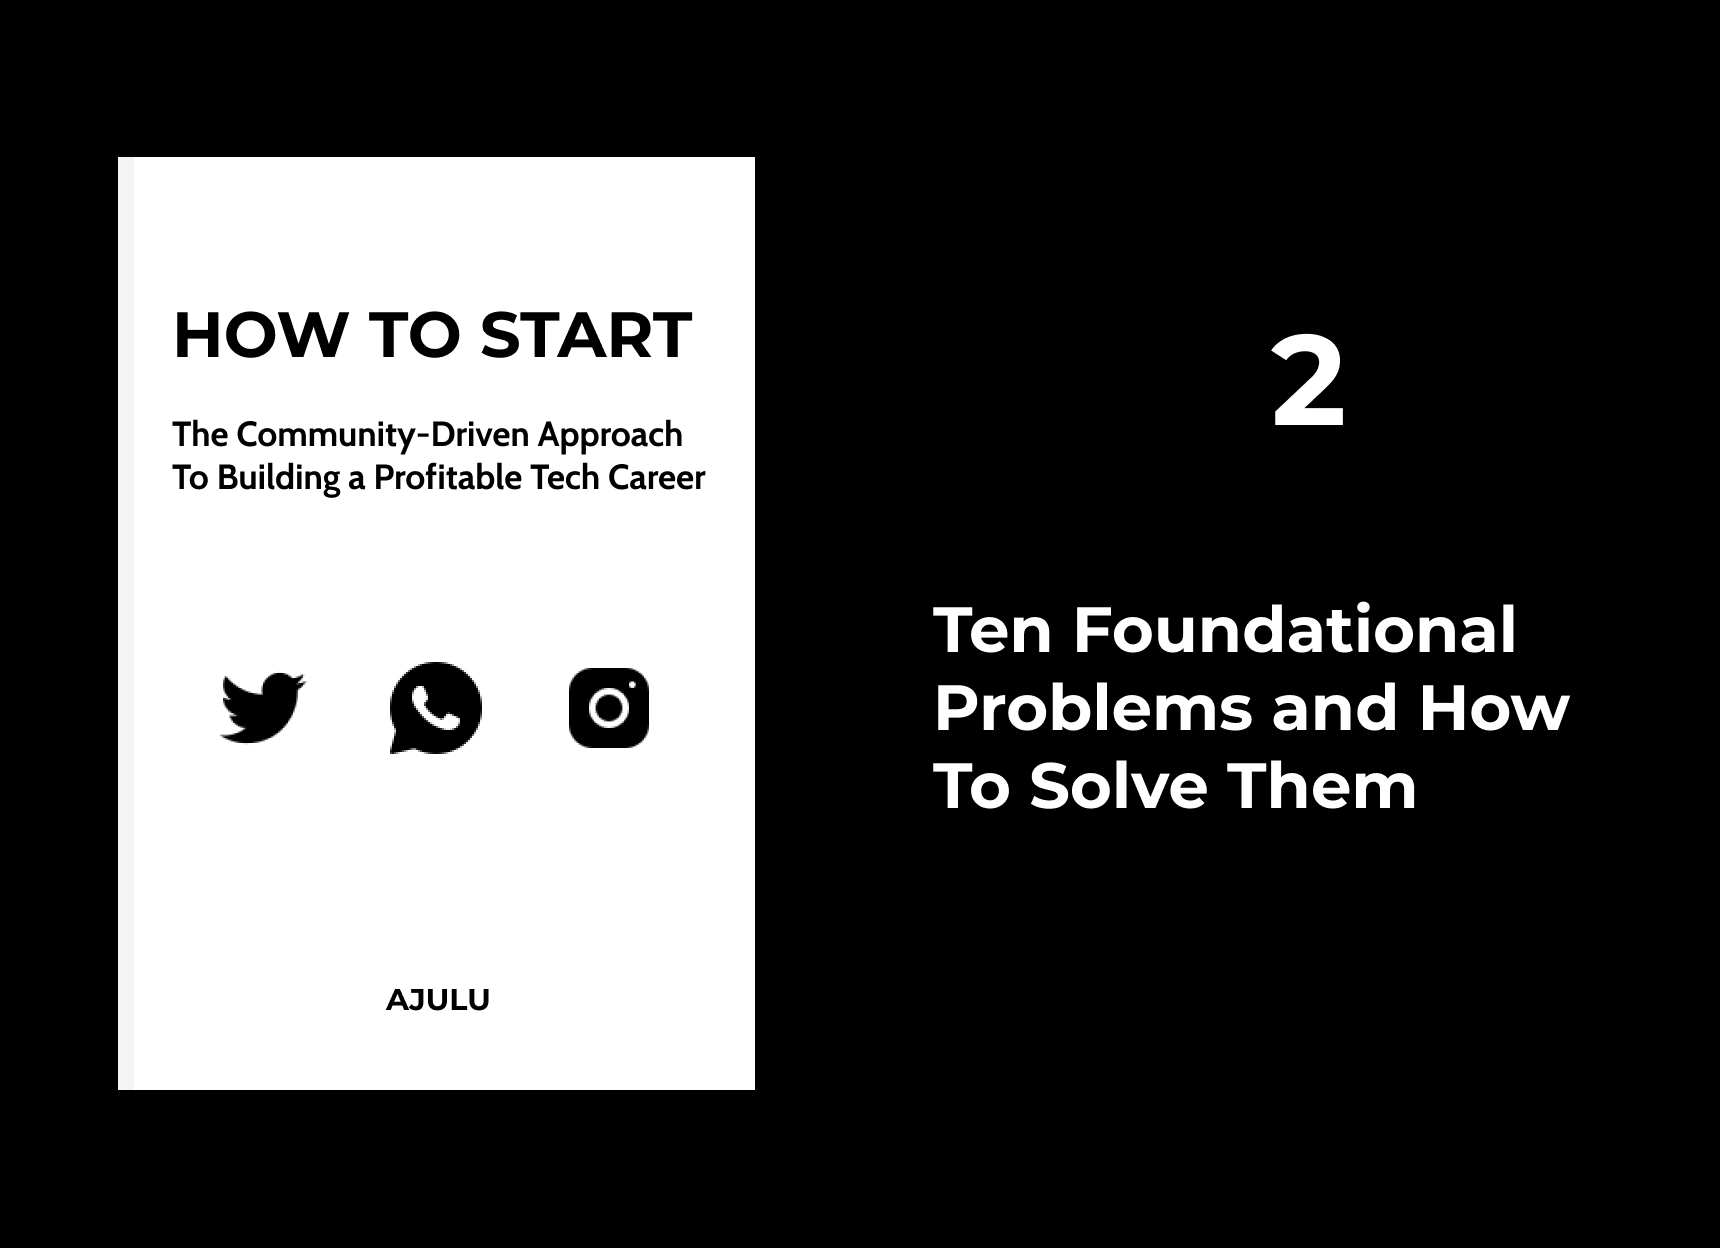 How To Start